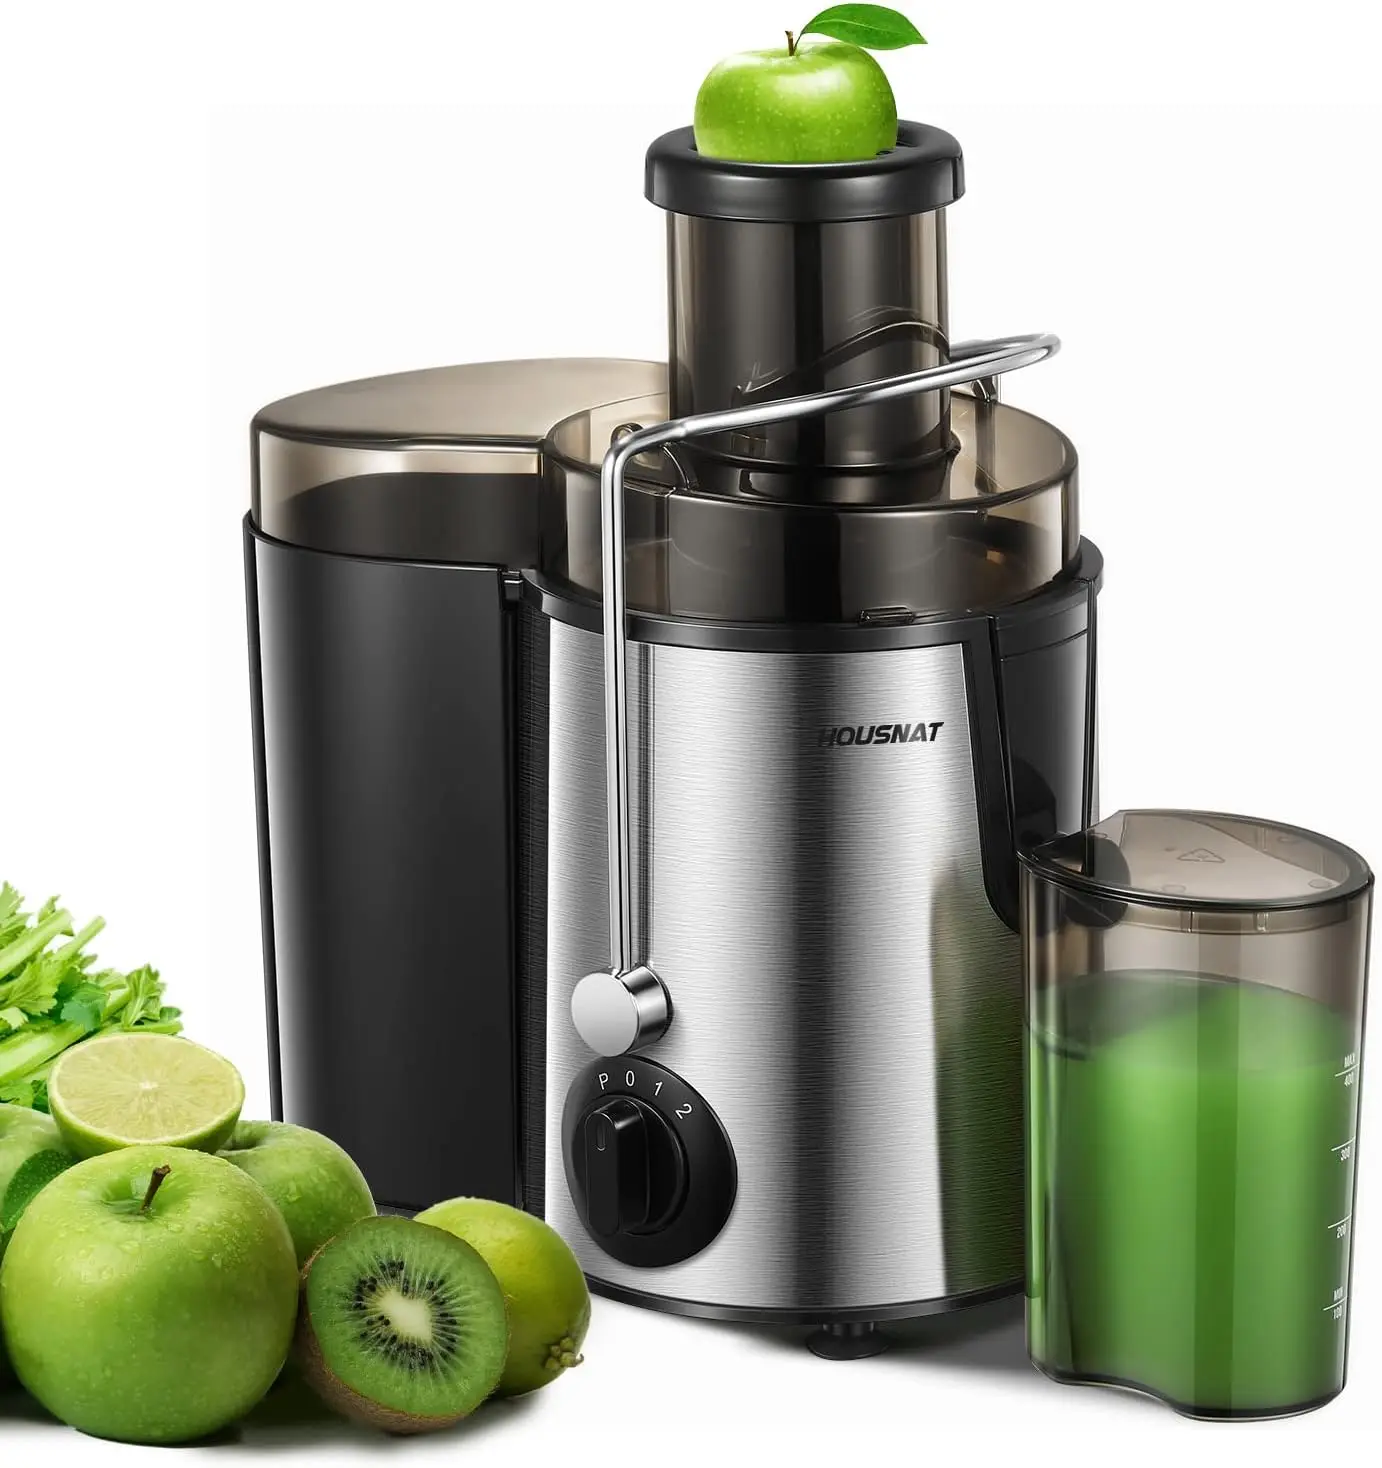 

Juicer Machines, HOUSNAT Juicer Whole Fruit and Vegetables with 3-Speed Setting, Upgraded Version 400 W Motor Quick Juicing